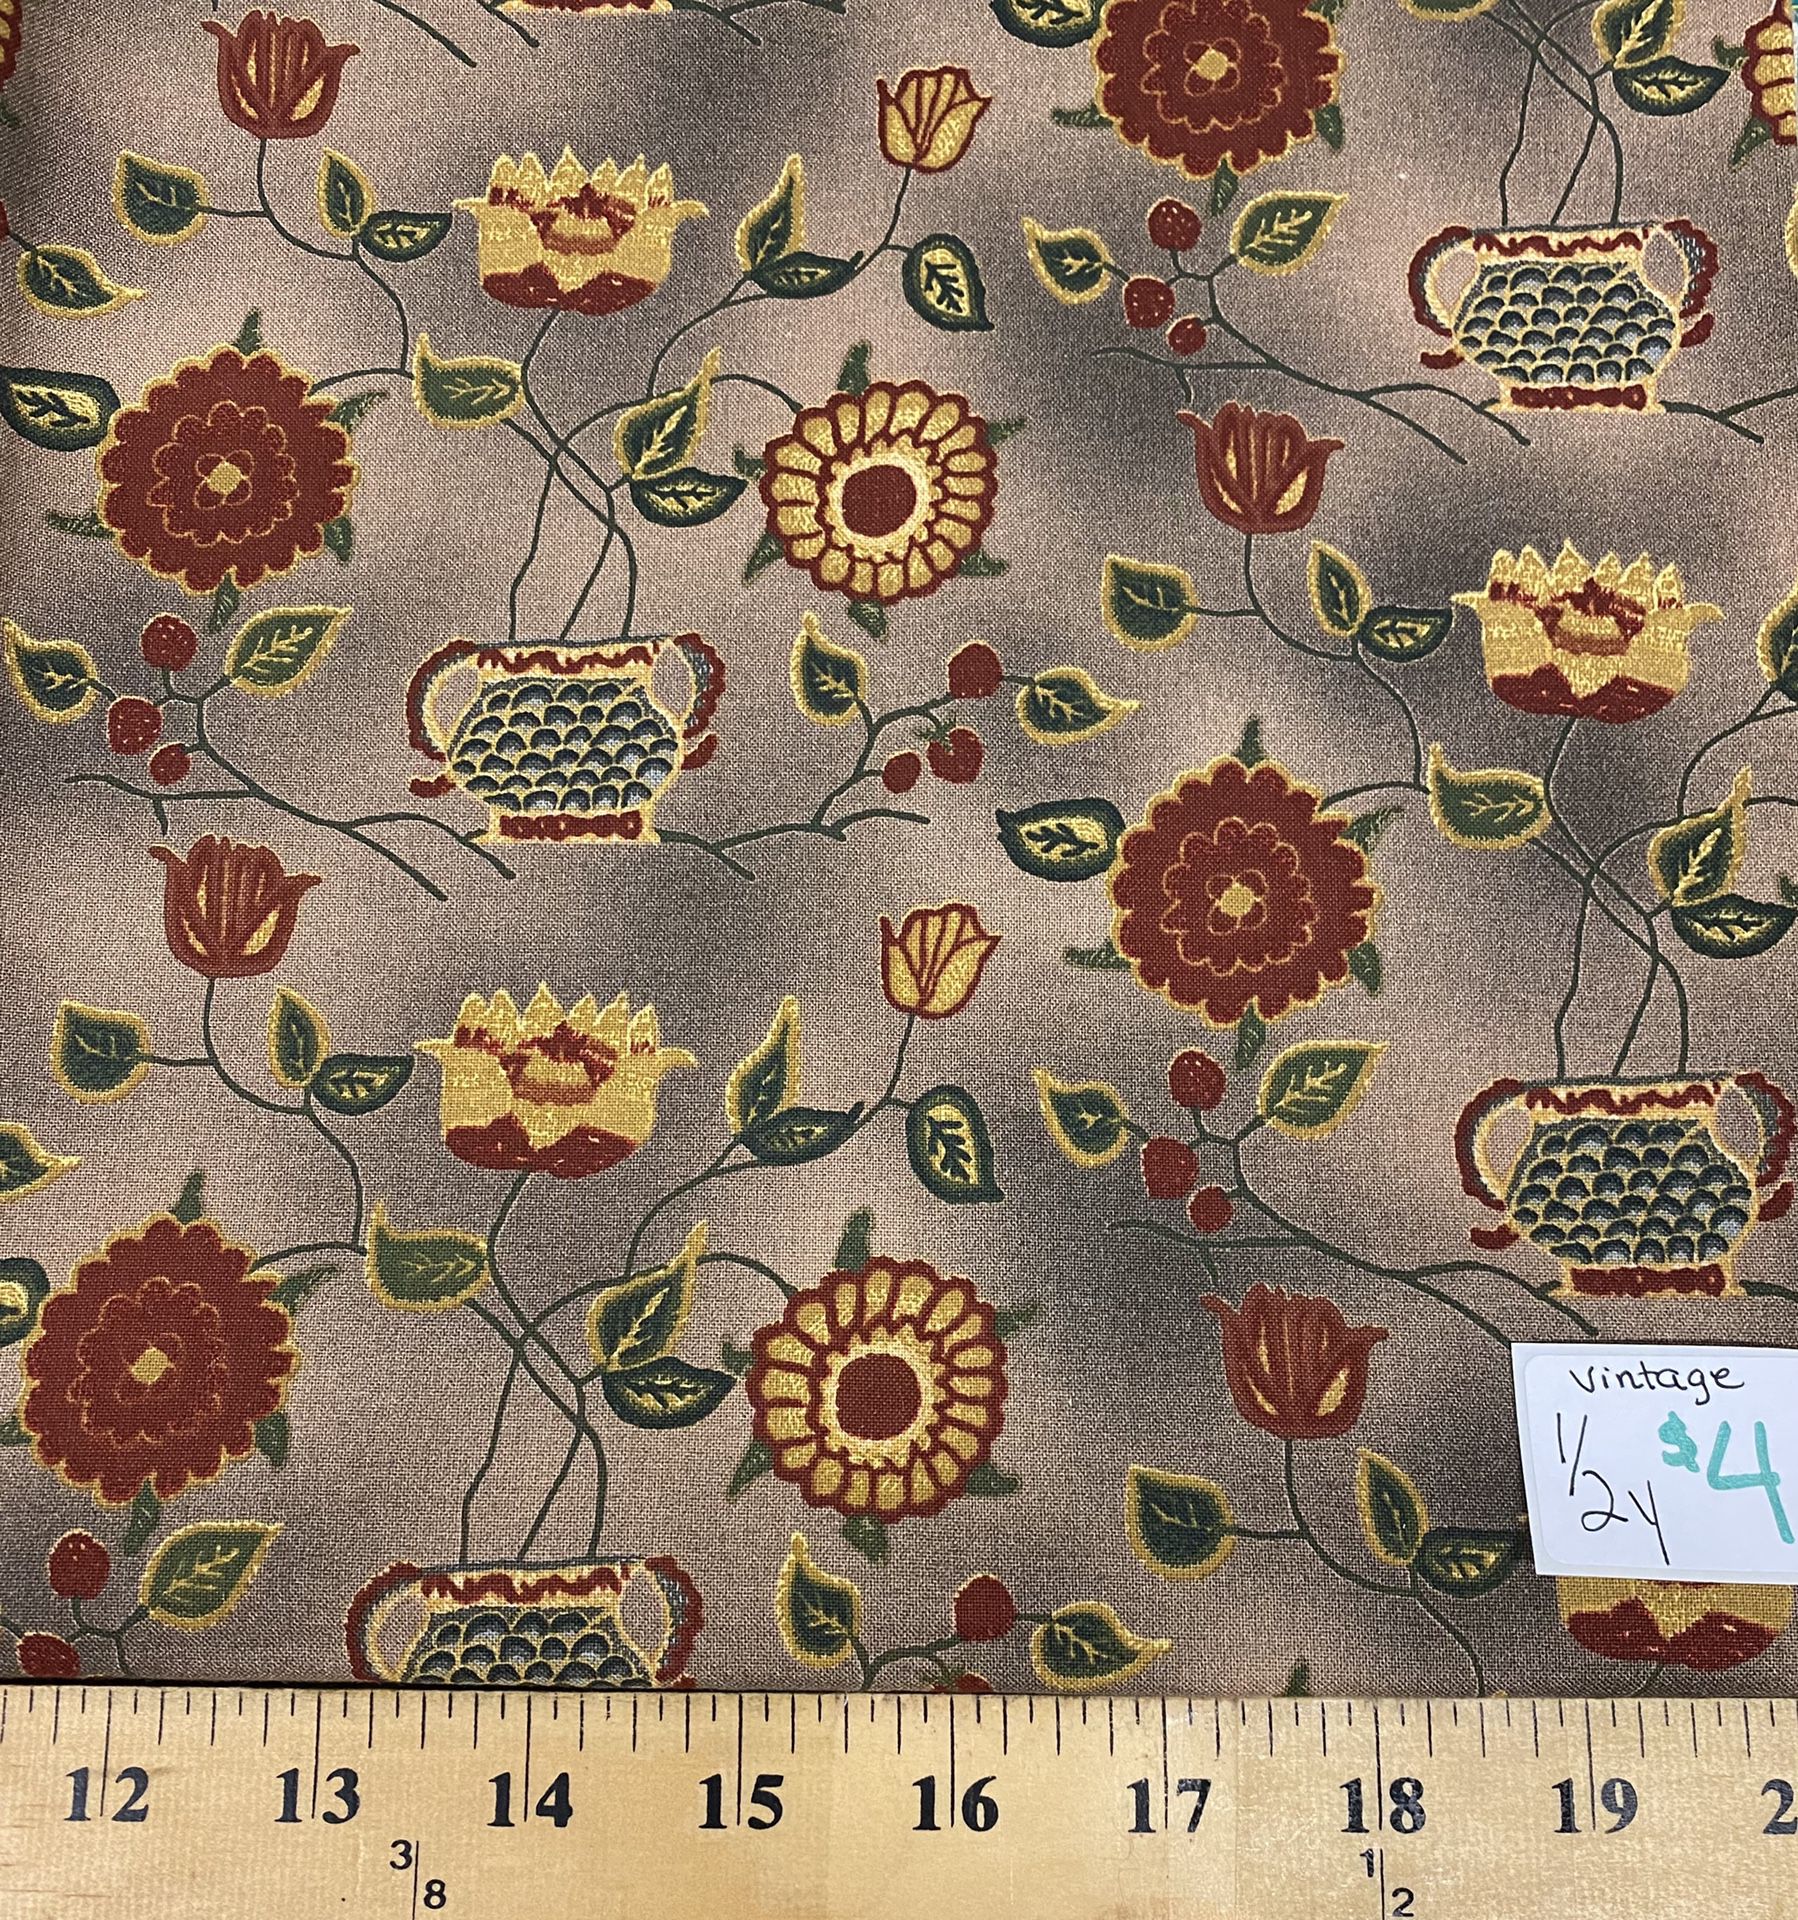 Floral on brown vintage 1/2 yard cotton fabric & 4 others pictured